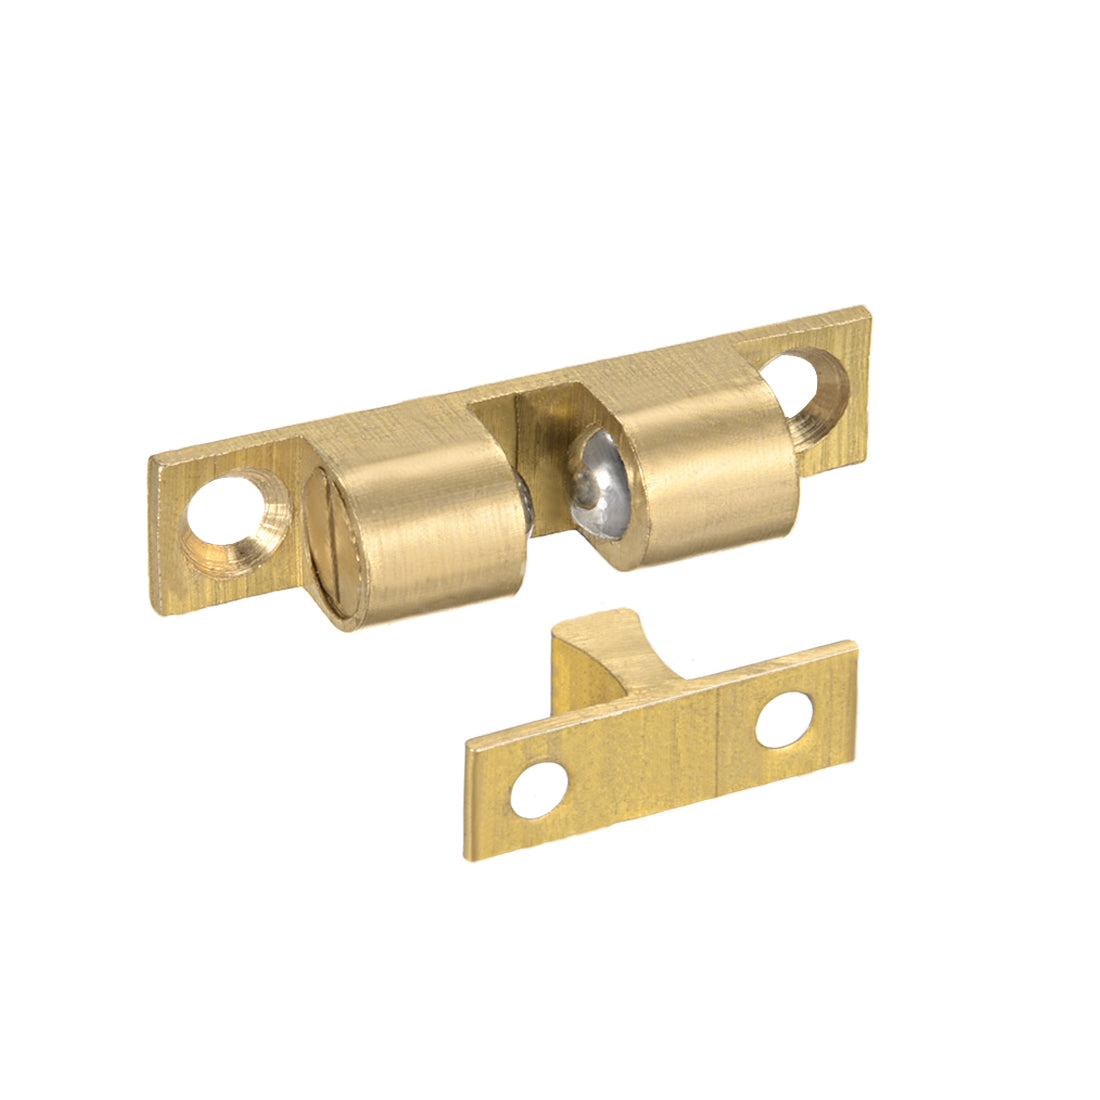 uxcell Uxcell Cabinet Door Closet Brass Double Ball Catch Tension Latch 35mm Length Gold Tone 5pcs